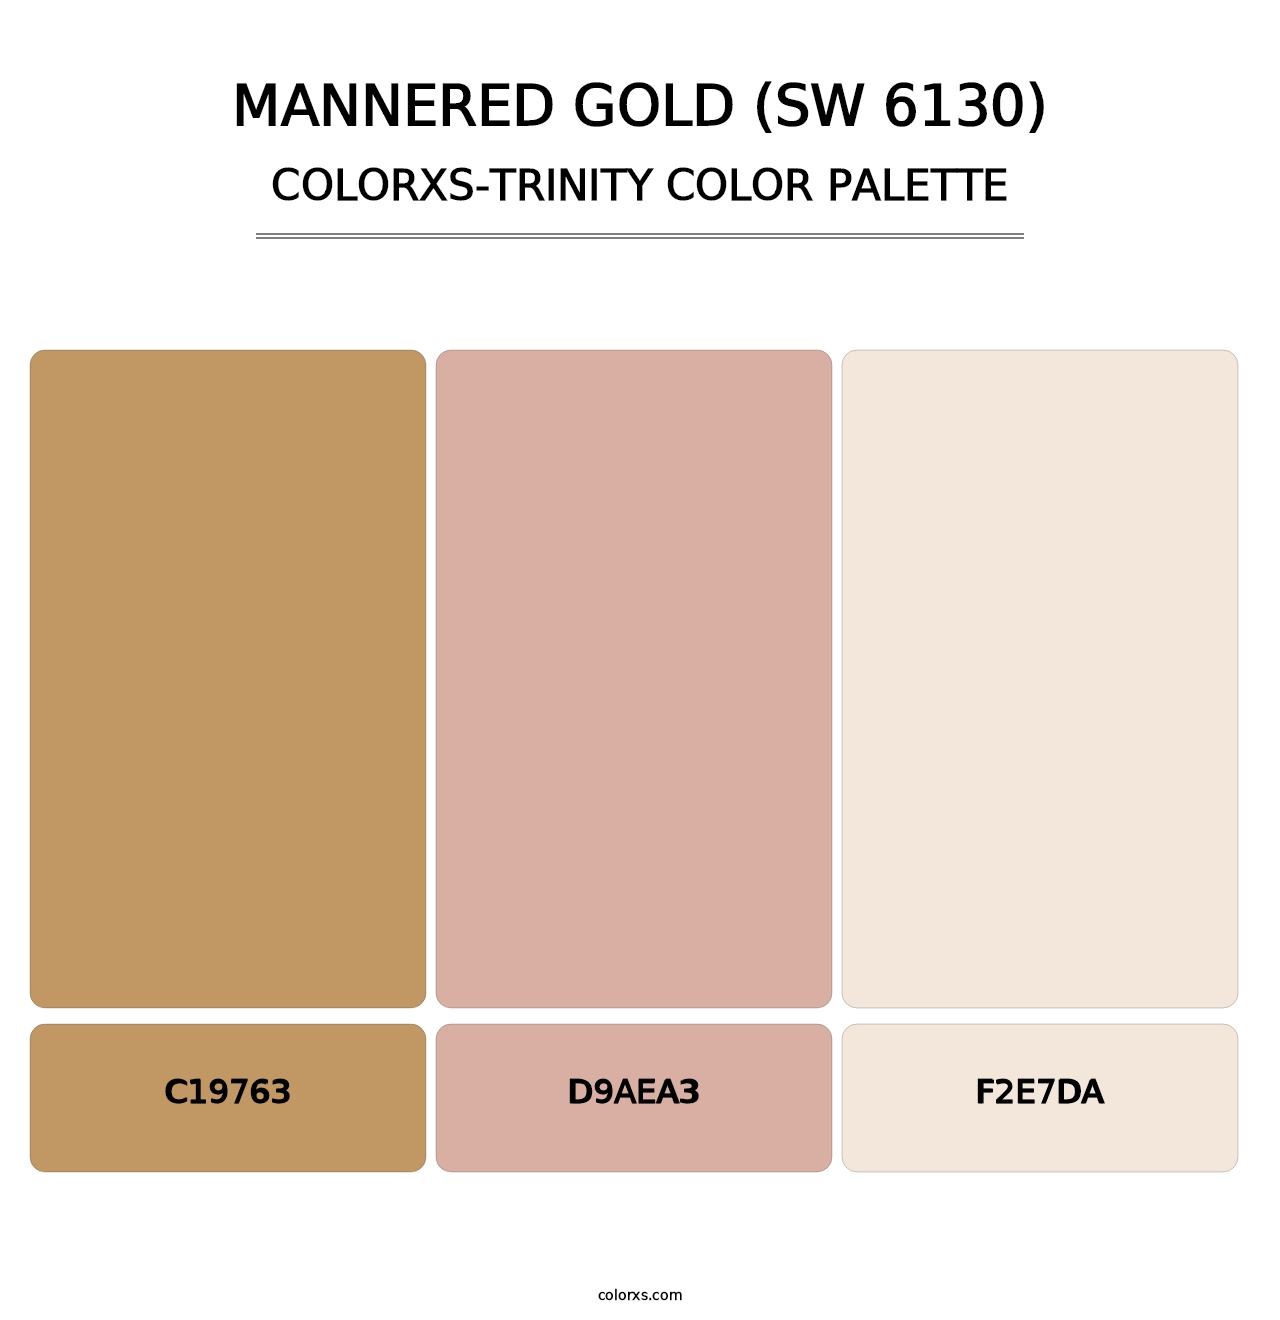 Mannered Gold (SW 6130) - Colorxs Trinity Palette